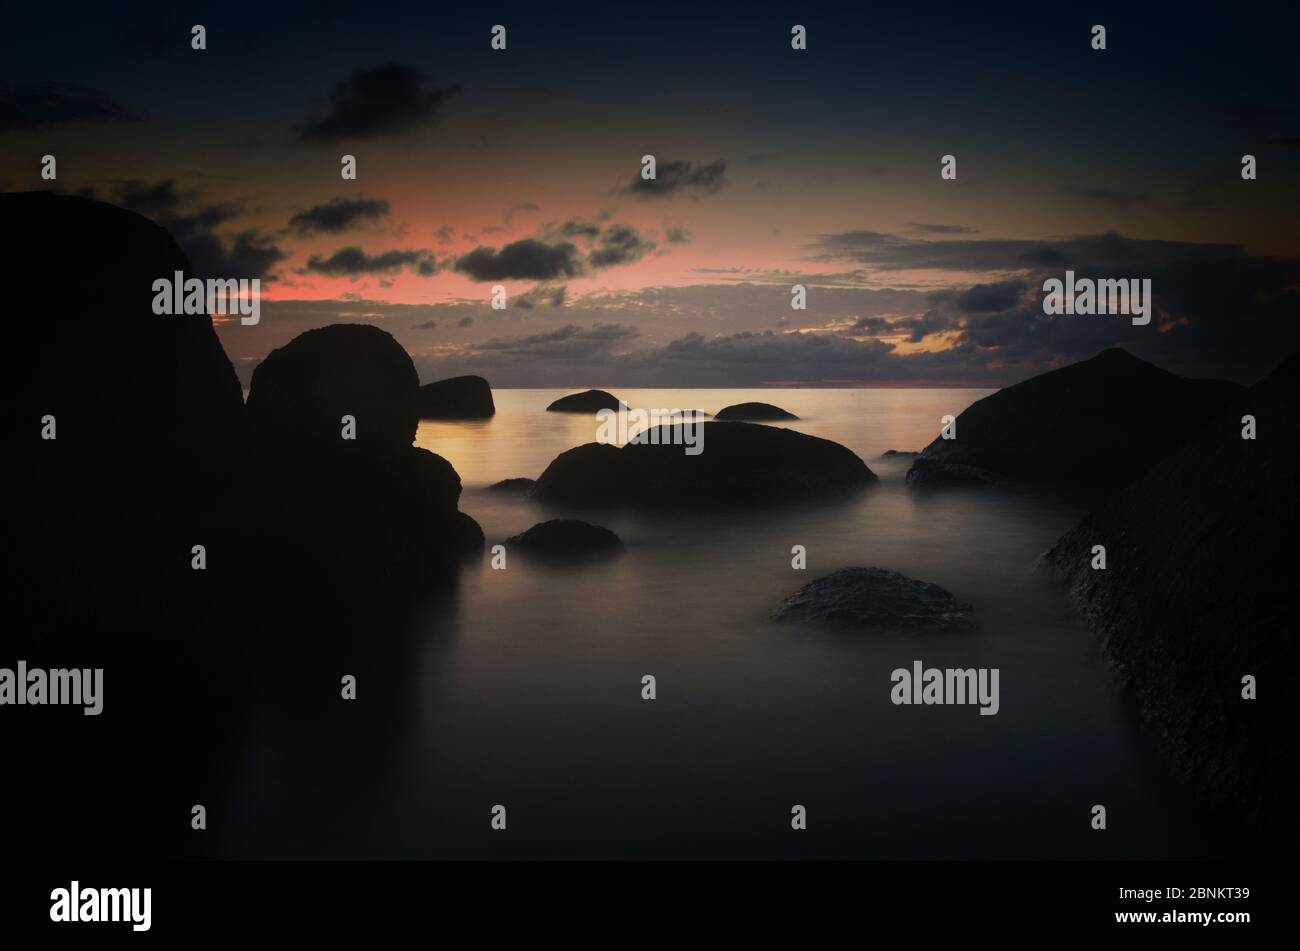 A long exposure during dusk at Sai Nuan beach on the west coast of Koh Tao, Thailand. The image shows granite formations Stock Photo